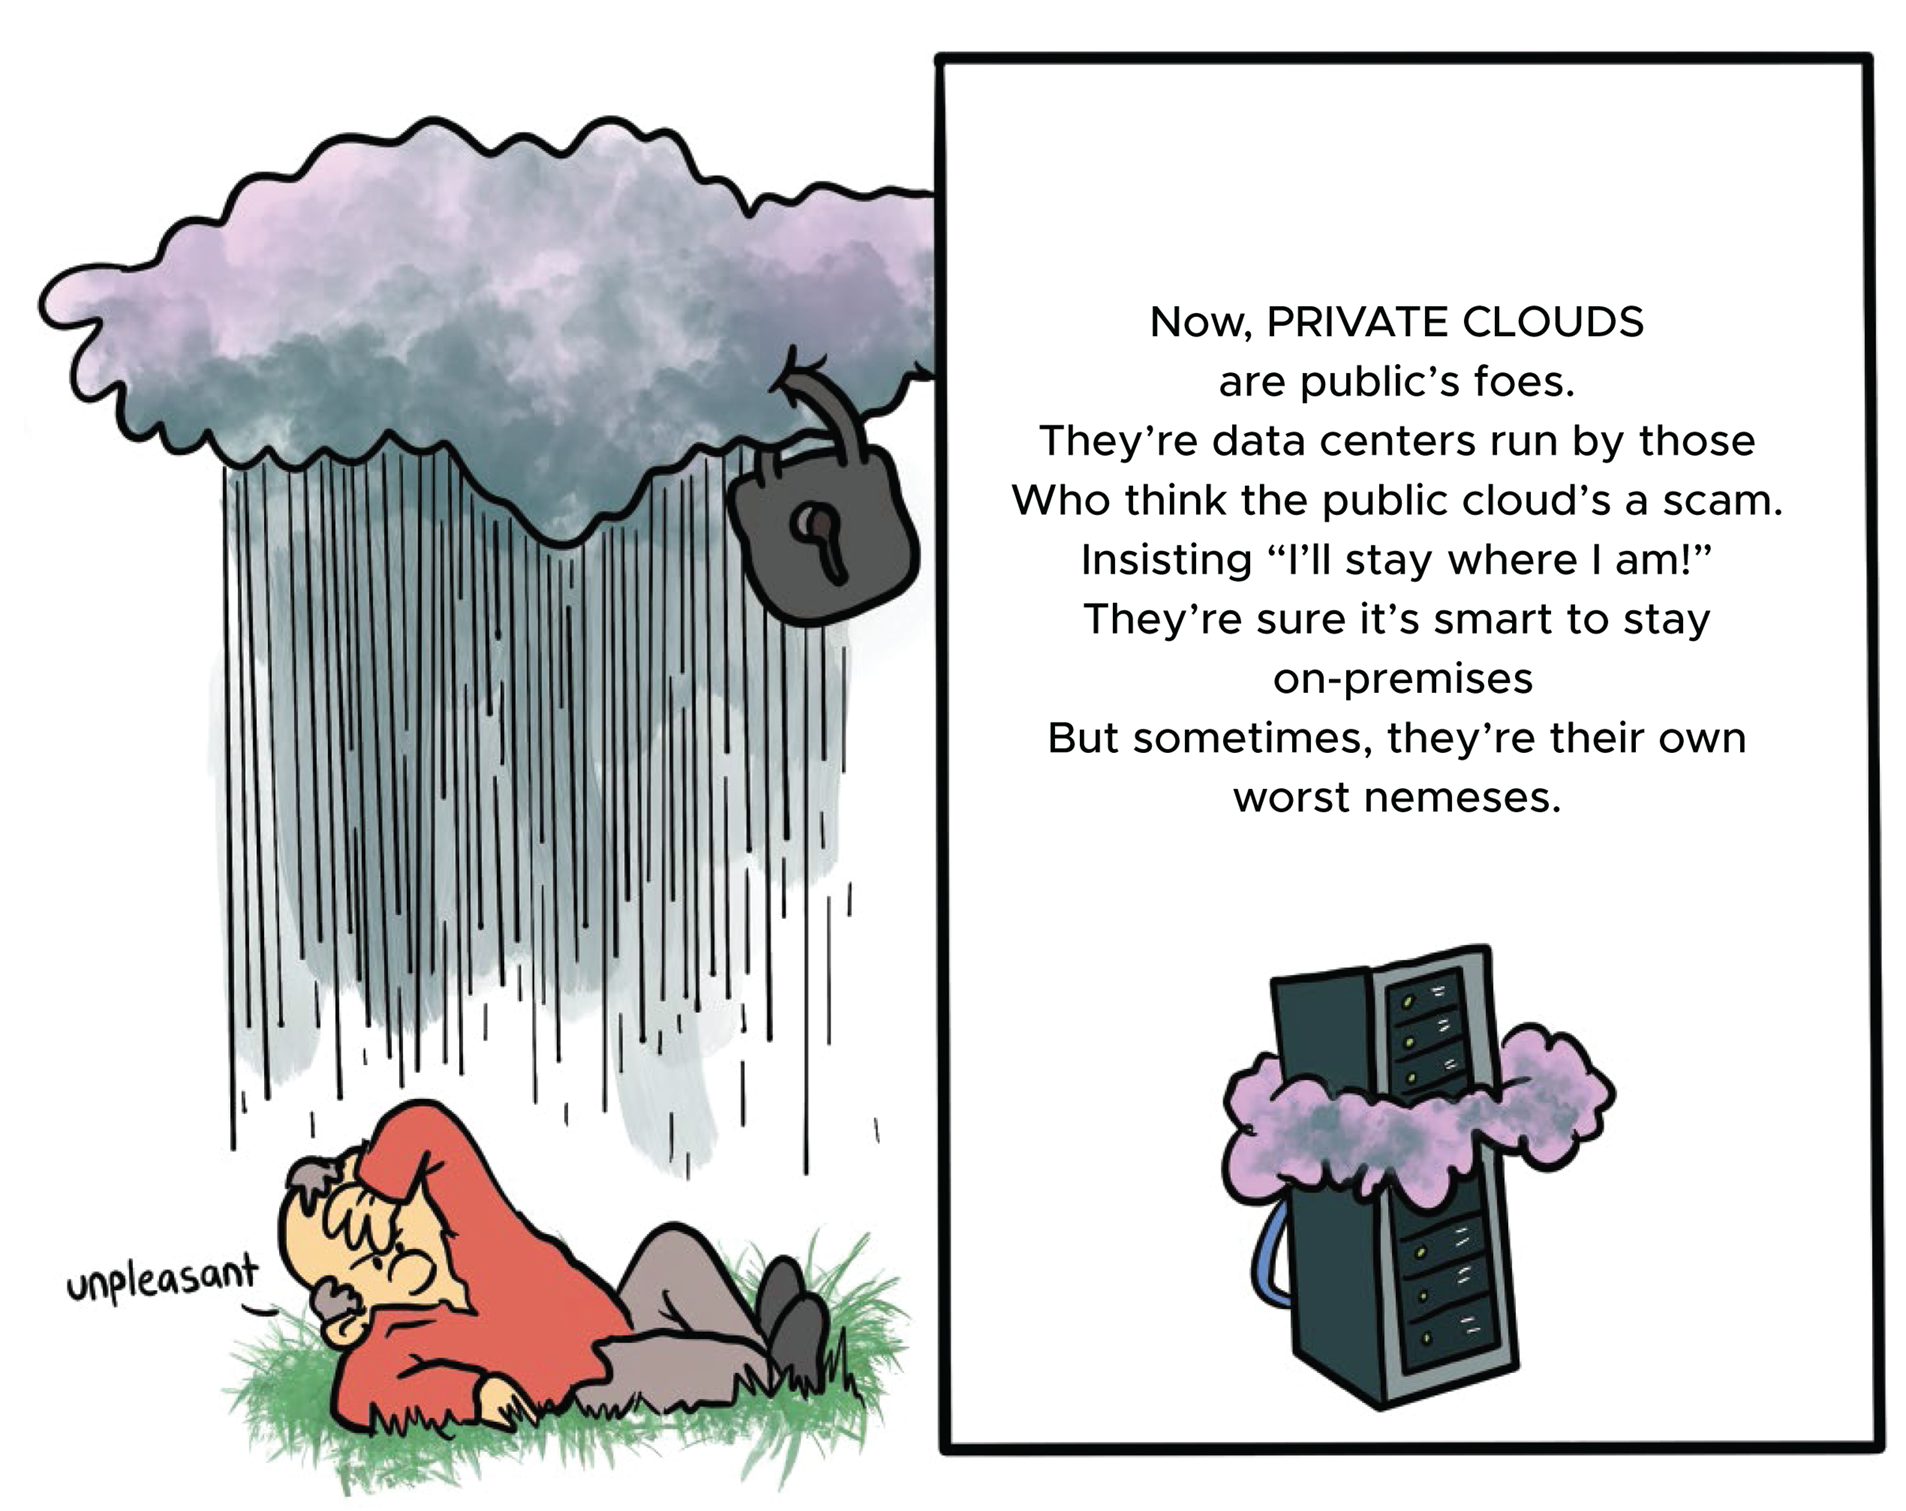 Cartoon illustration of a man feeling unpleasant due to private clouds.